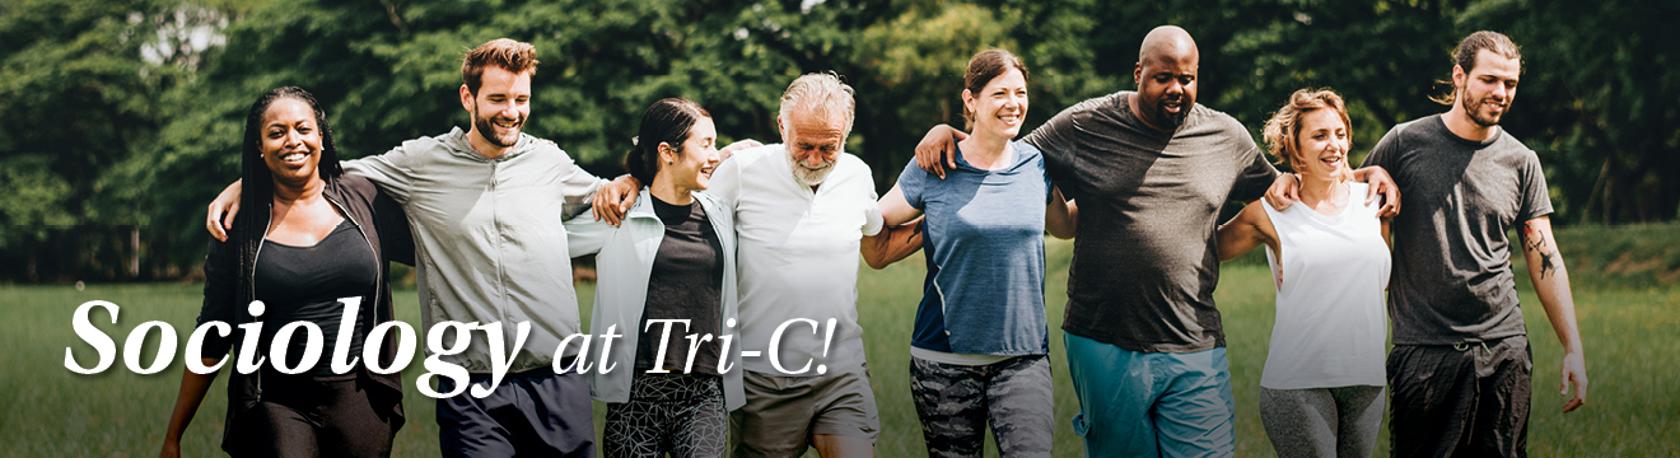 "Sociology at Tri-C!" with image of people coming together.